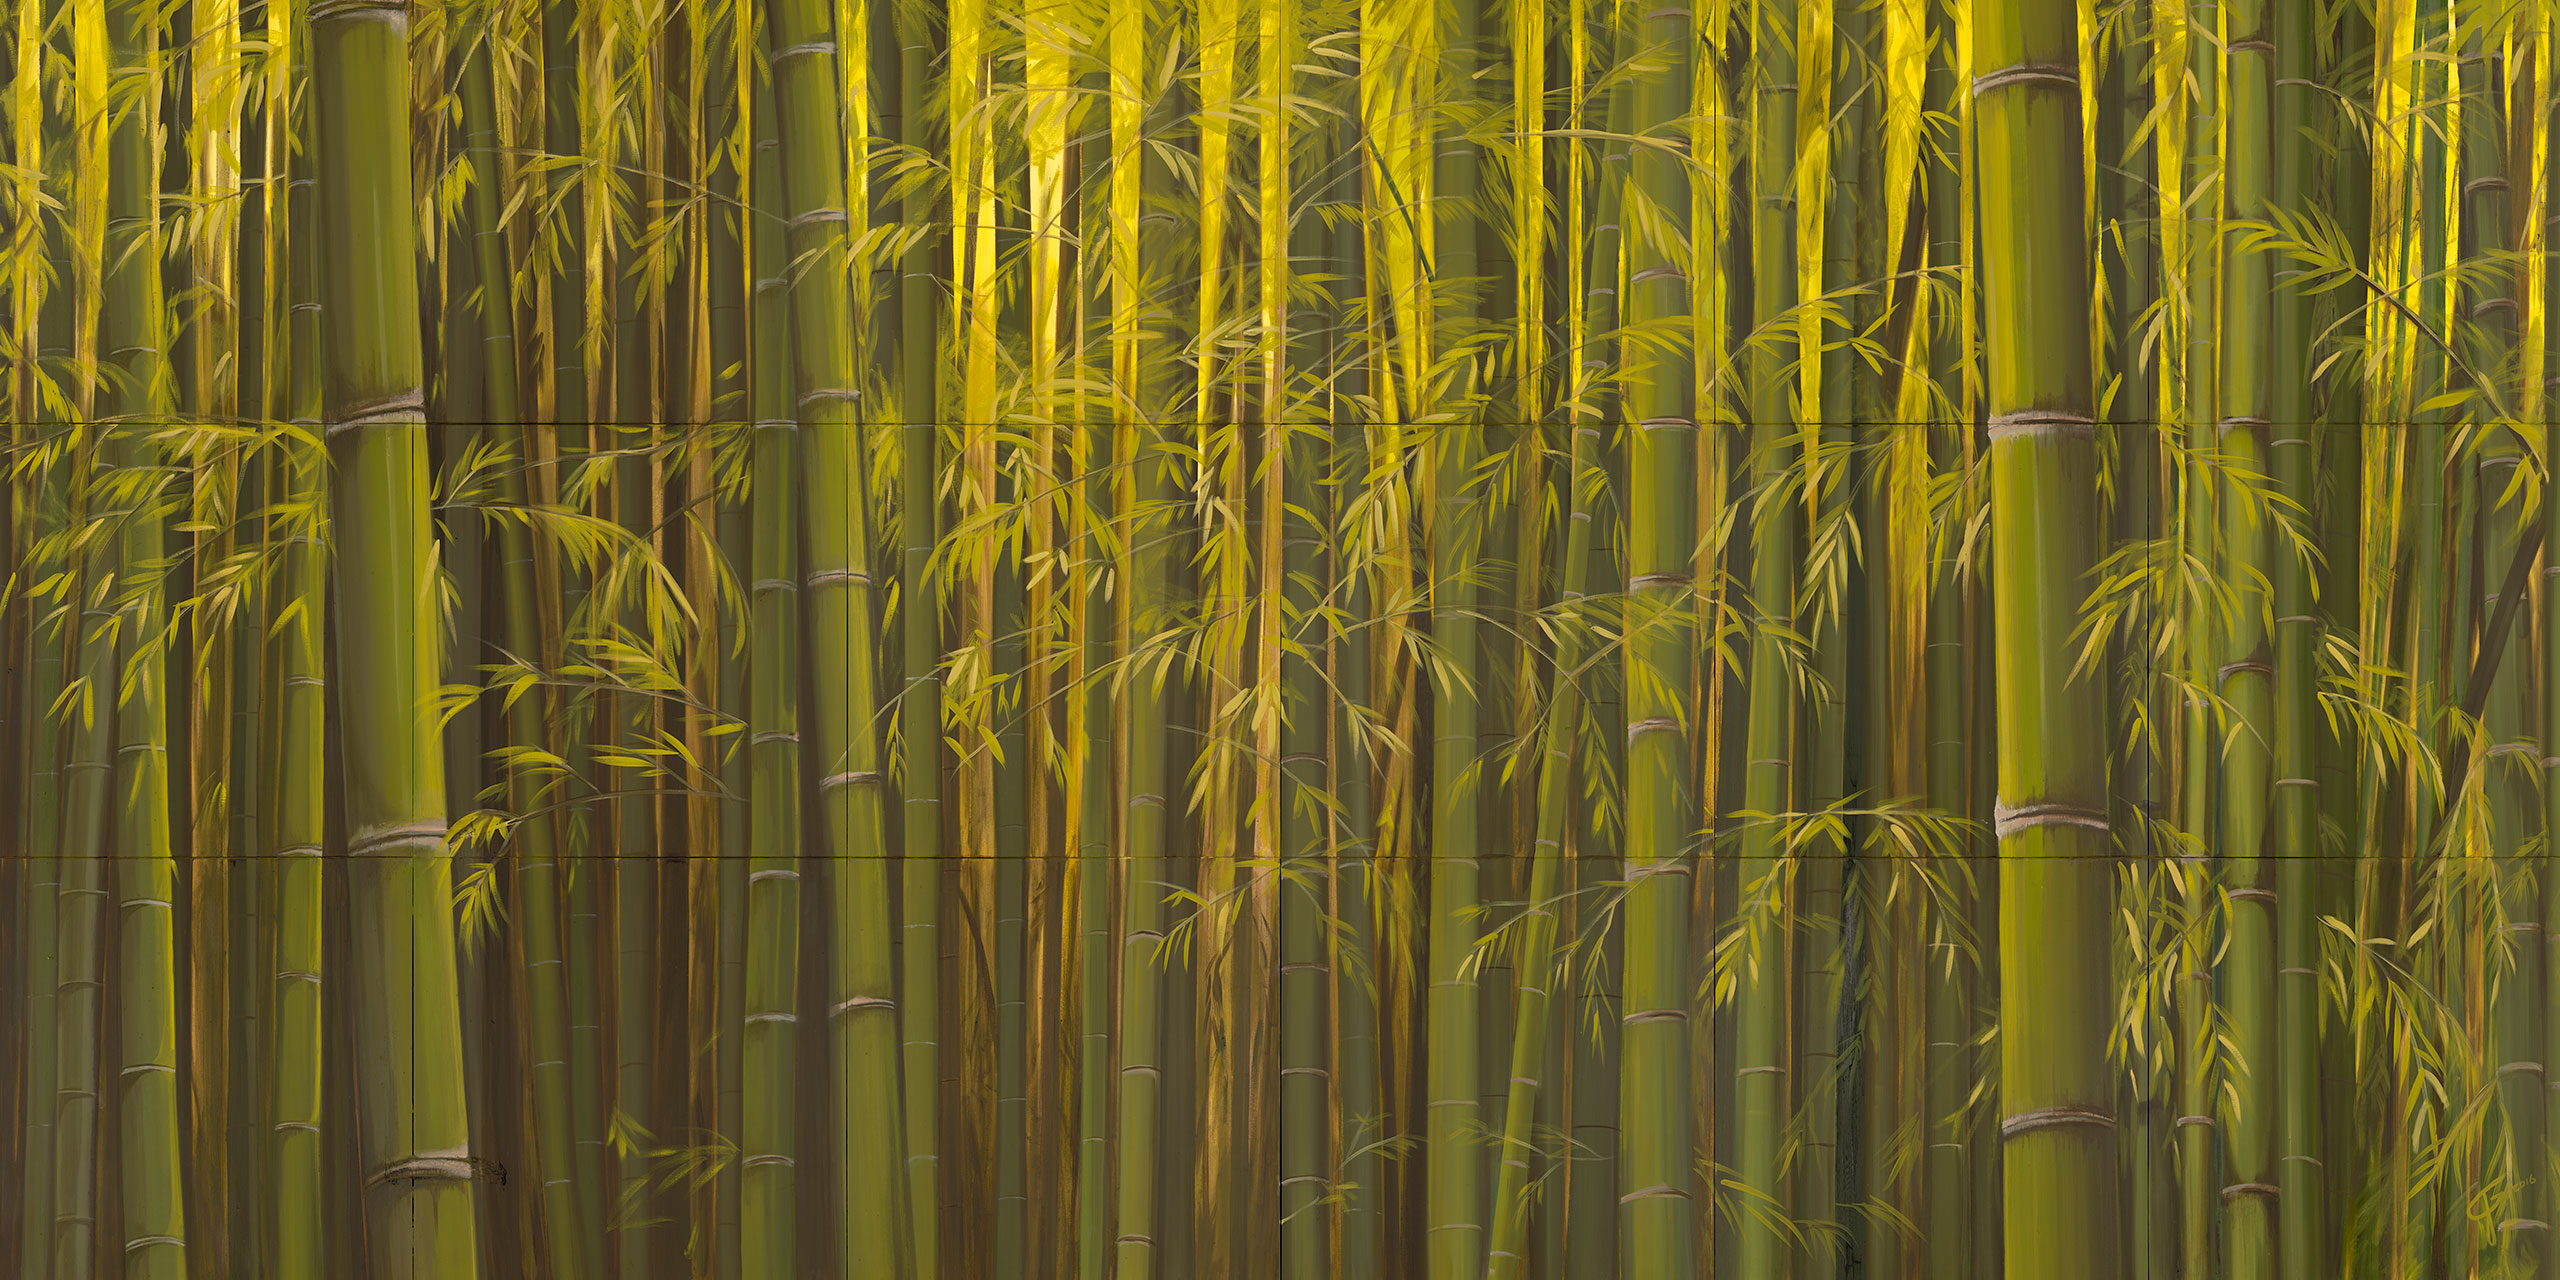 Lessons Of The Bamboo